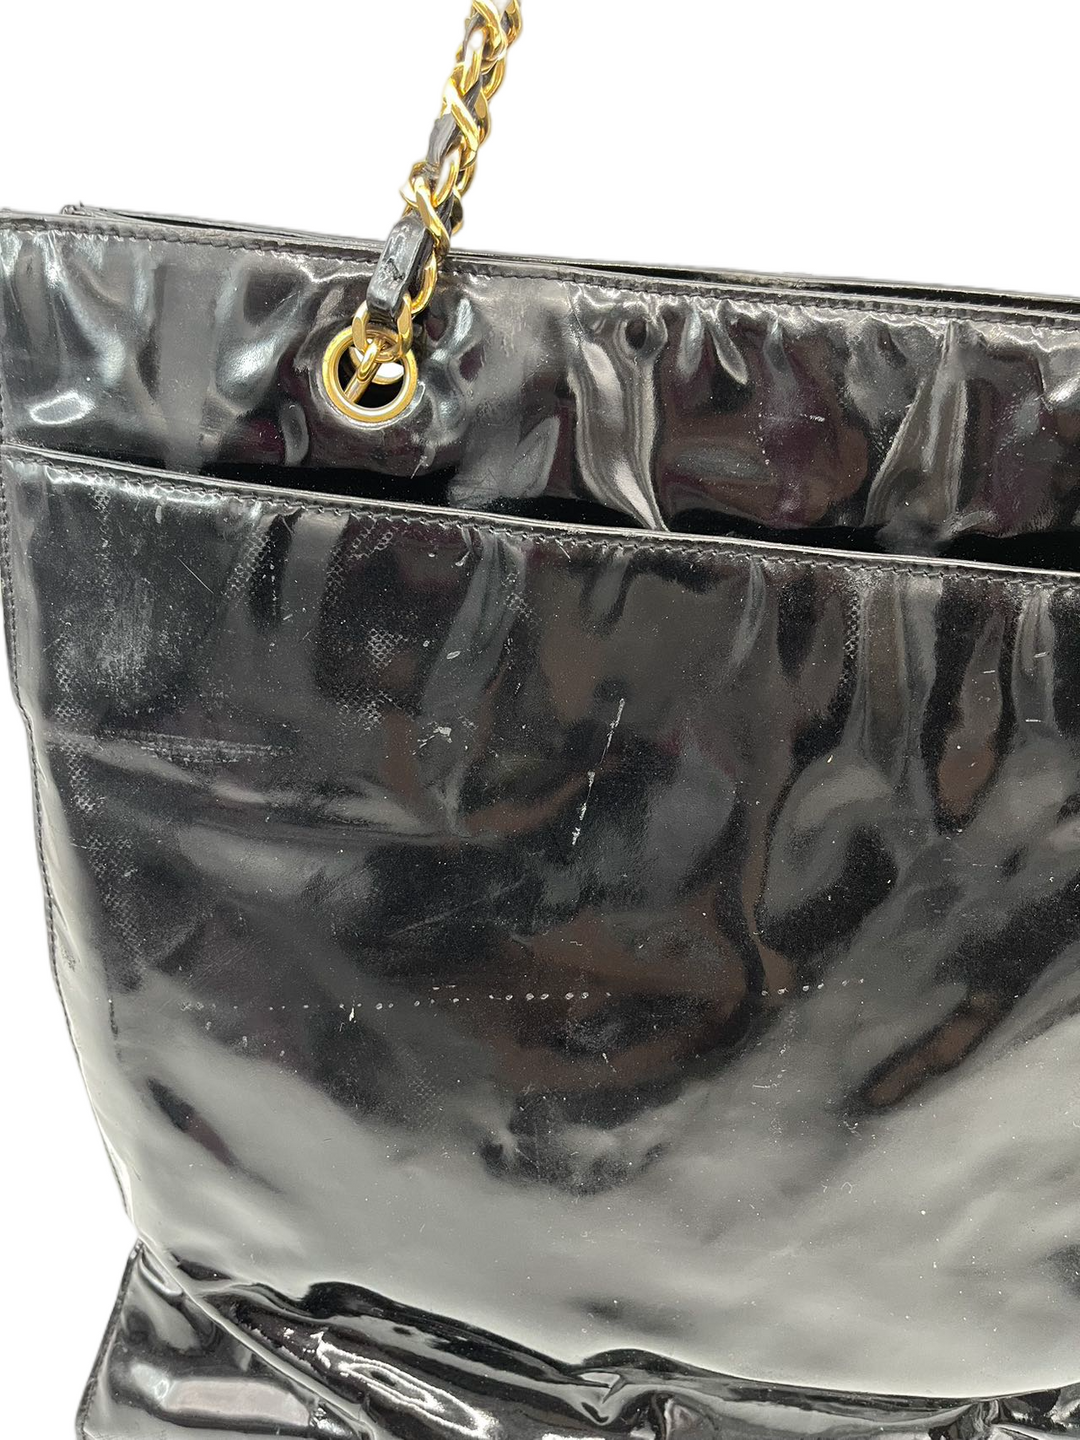 Pre-Owned Chanel Black Patent Leather Vintage Totes